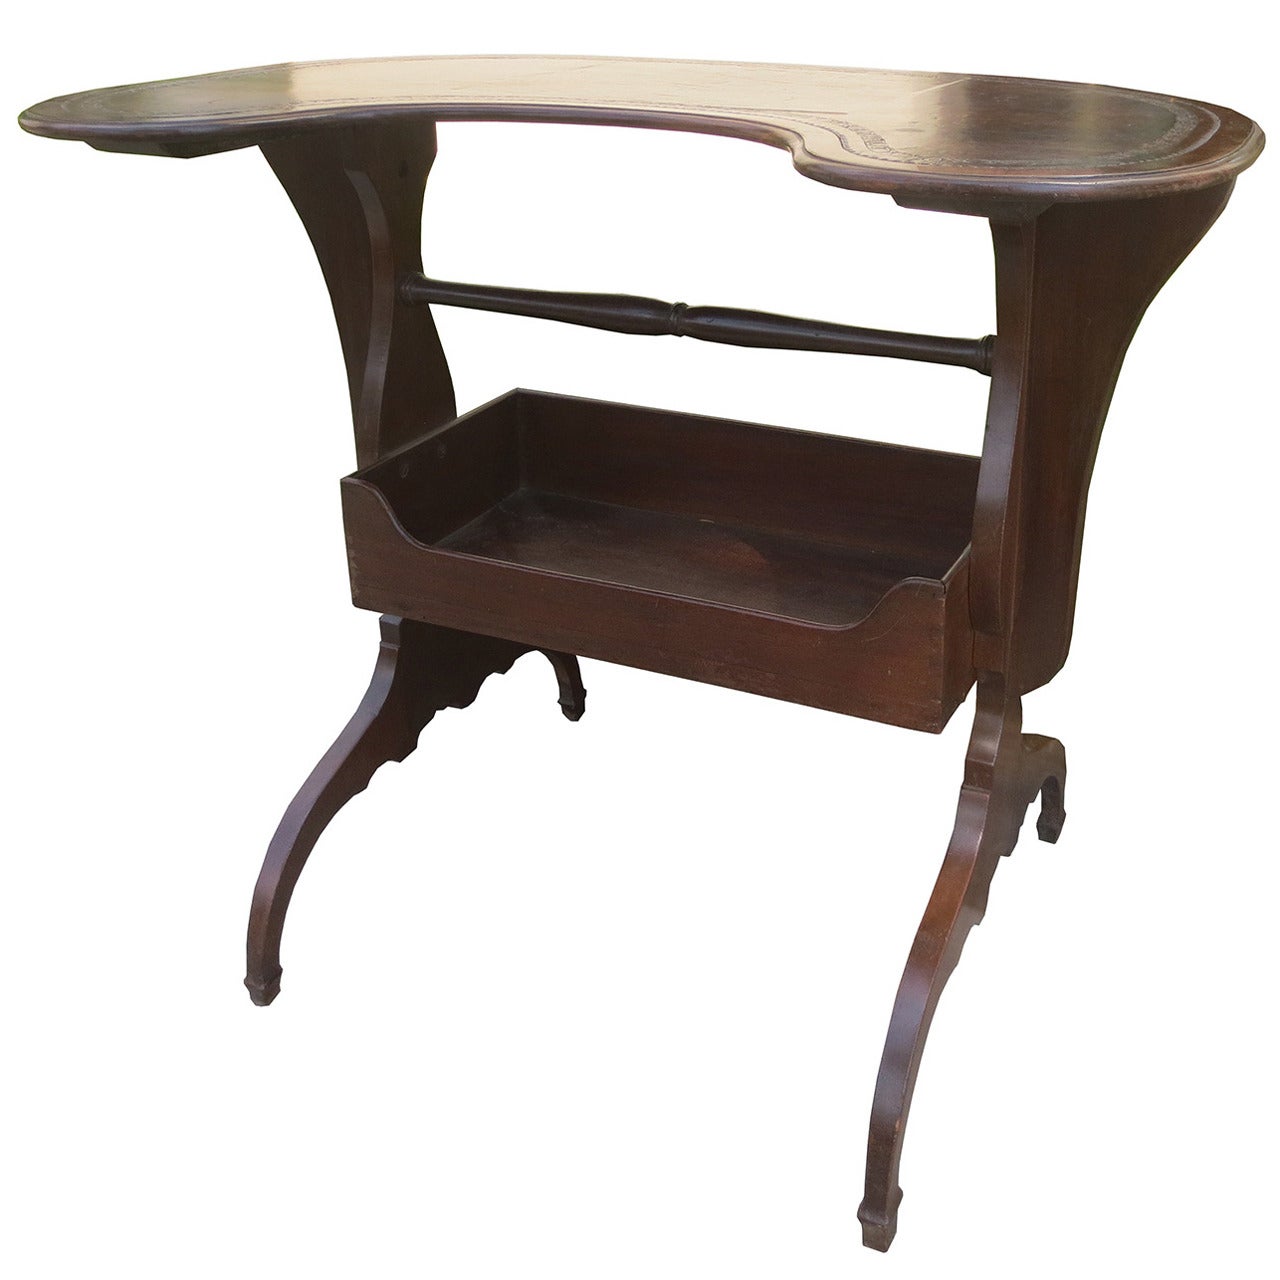 18th-19th Century French Kidney Shape Leather Top Writing Table